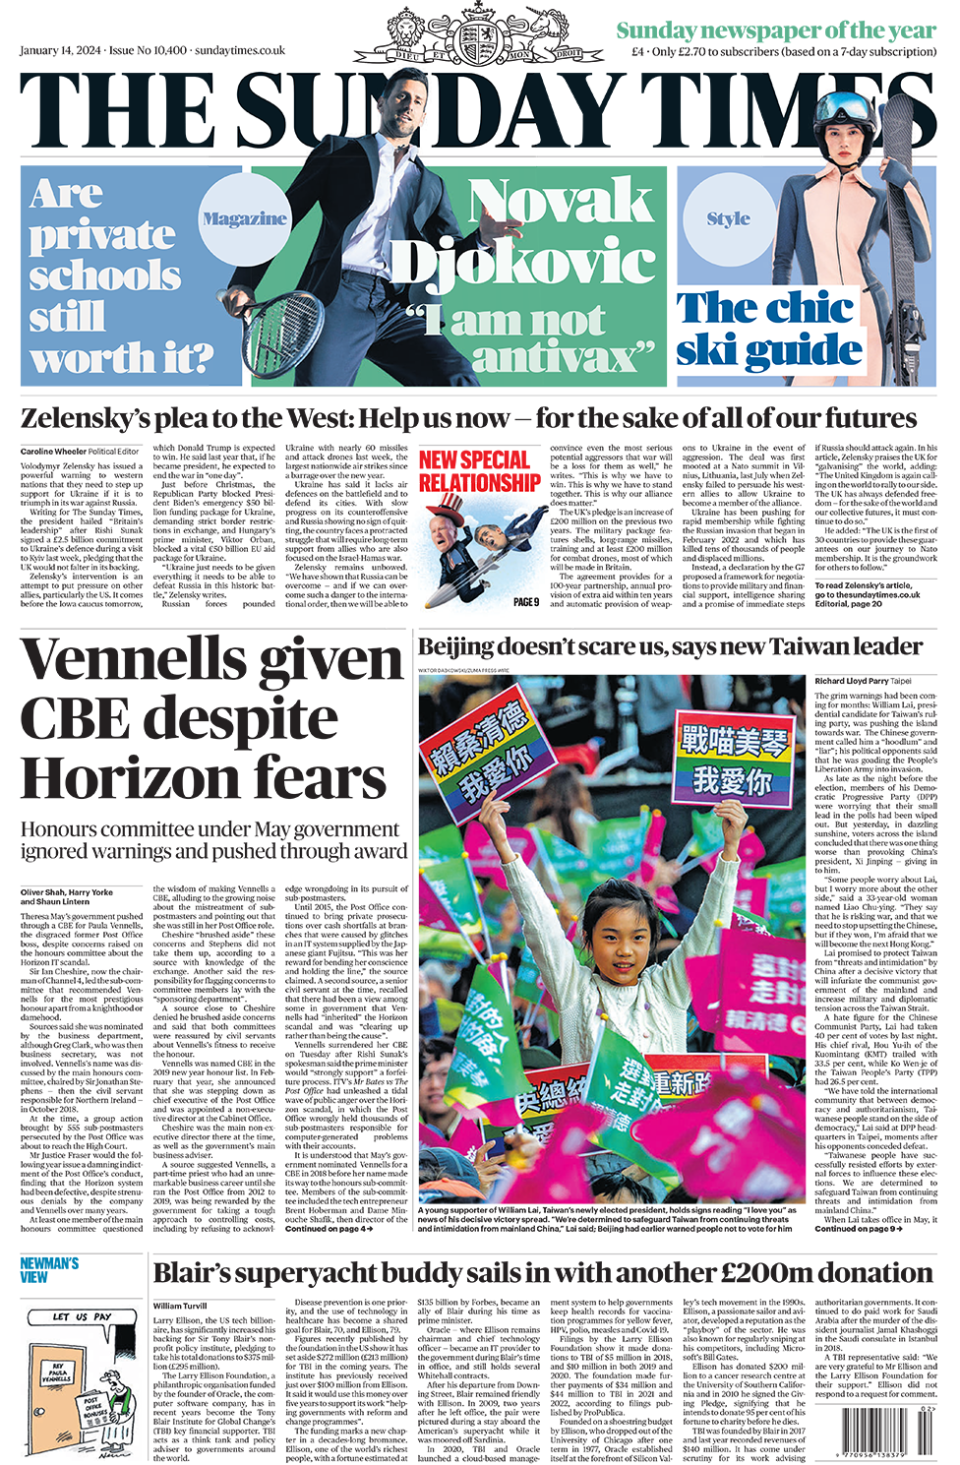 The main headline on the front page of the Sunday Times reads: "Vennells given CBE despite Horizon fears"